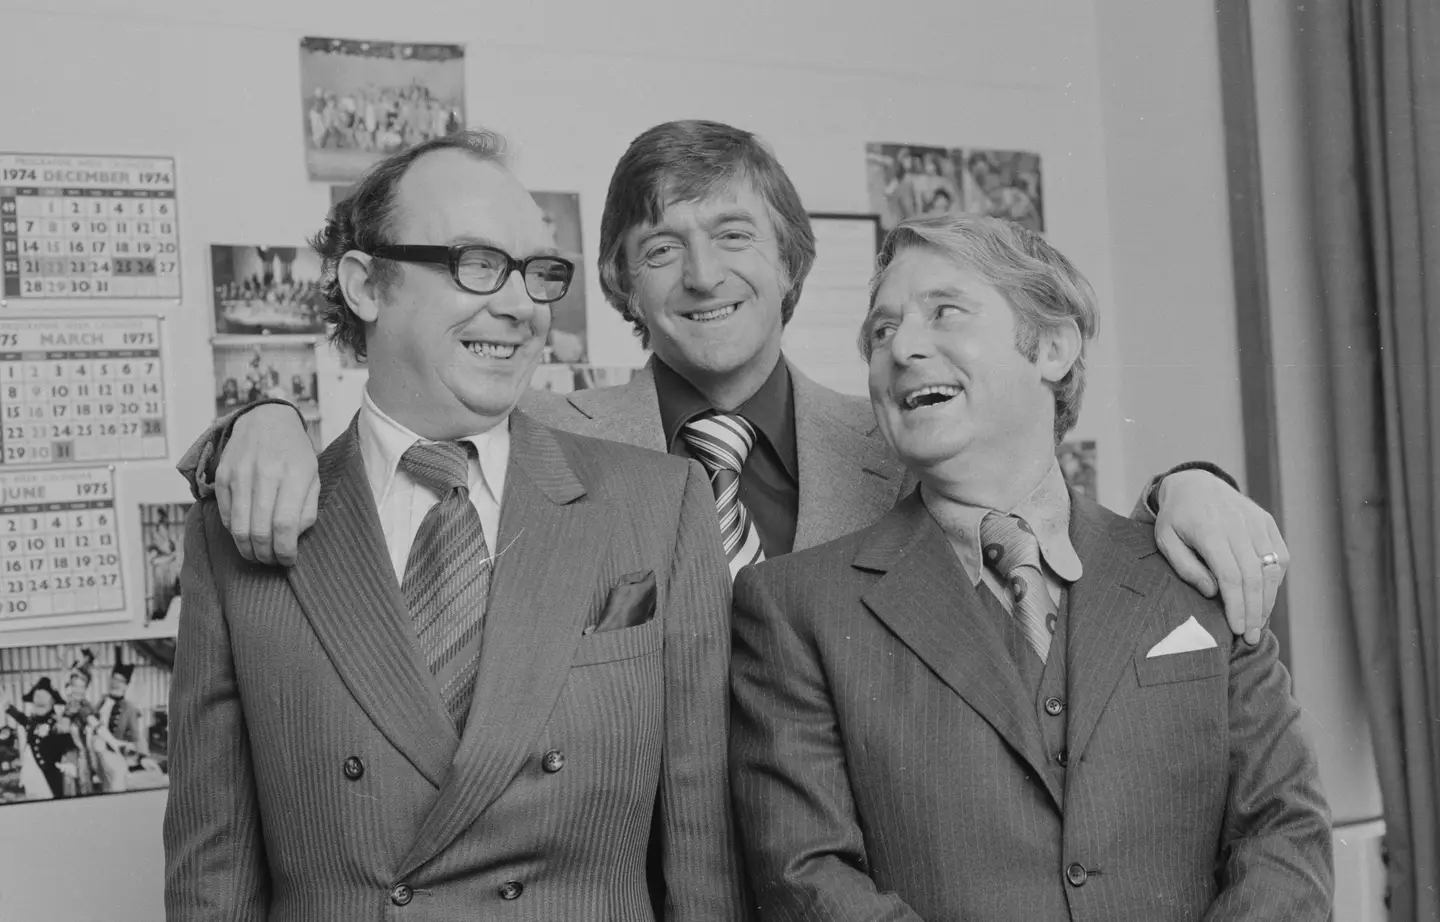 Michael Parkinson with comedians Morecambe and Wise.